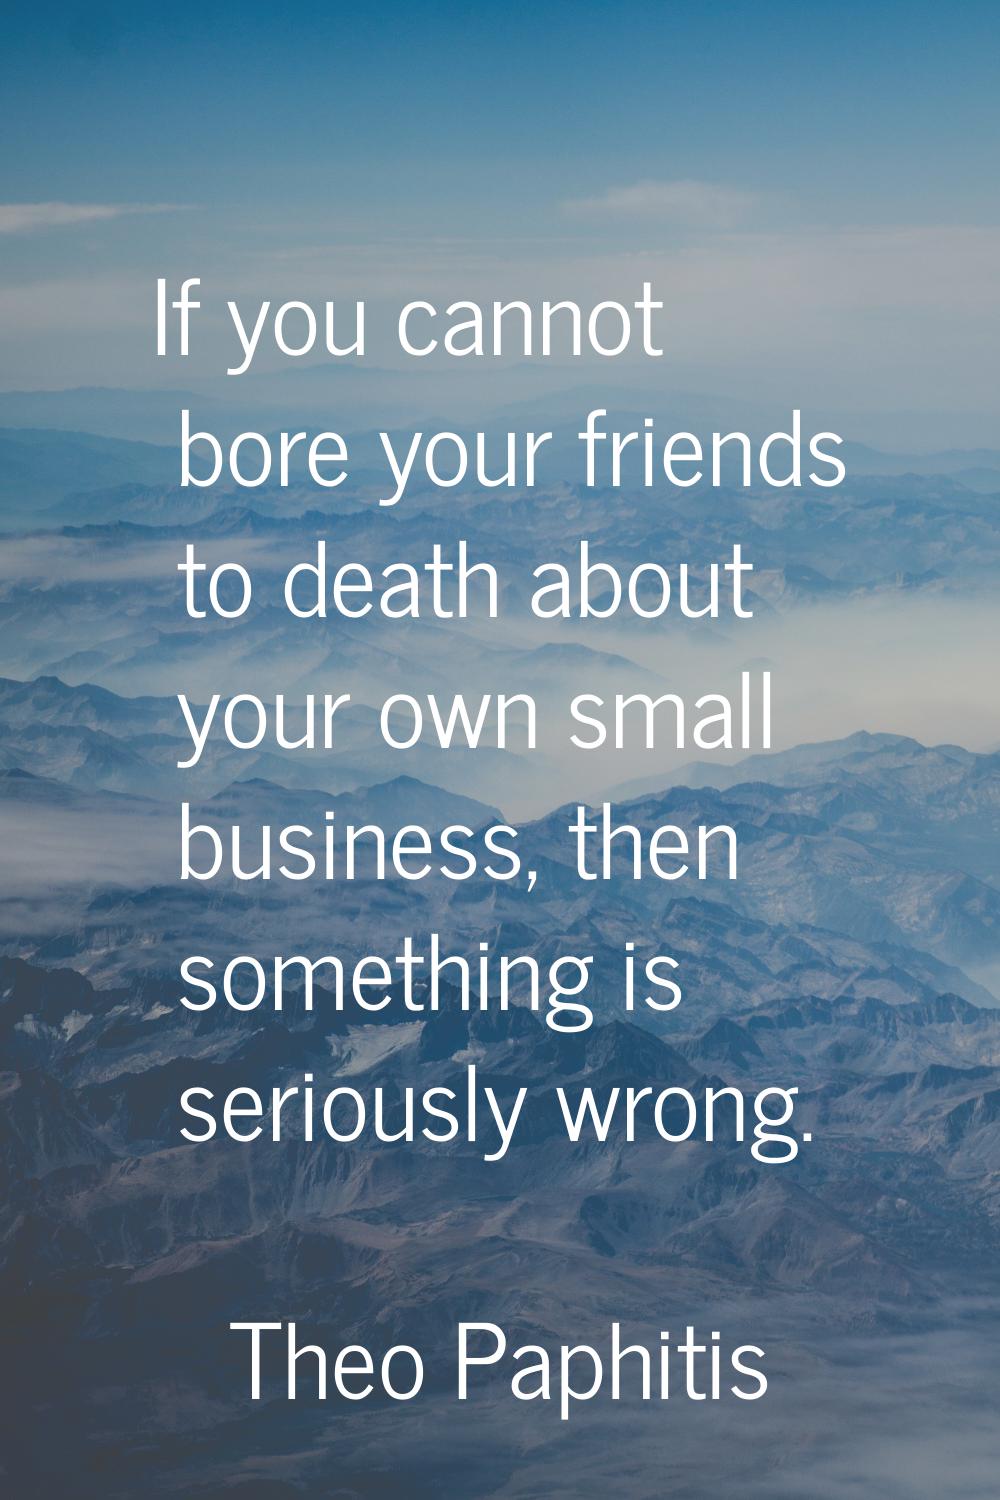 If you cannot bore your friends to death about your own small business, then something is seriously